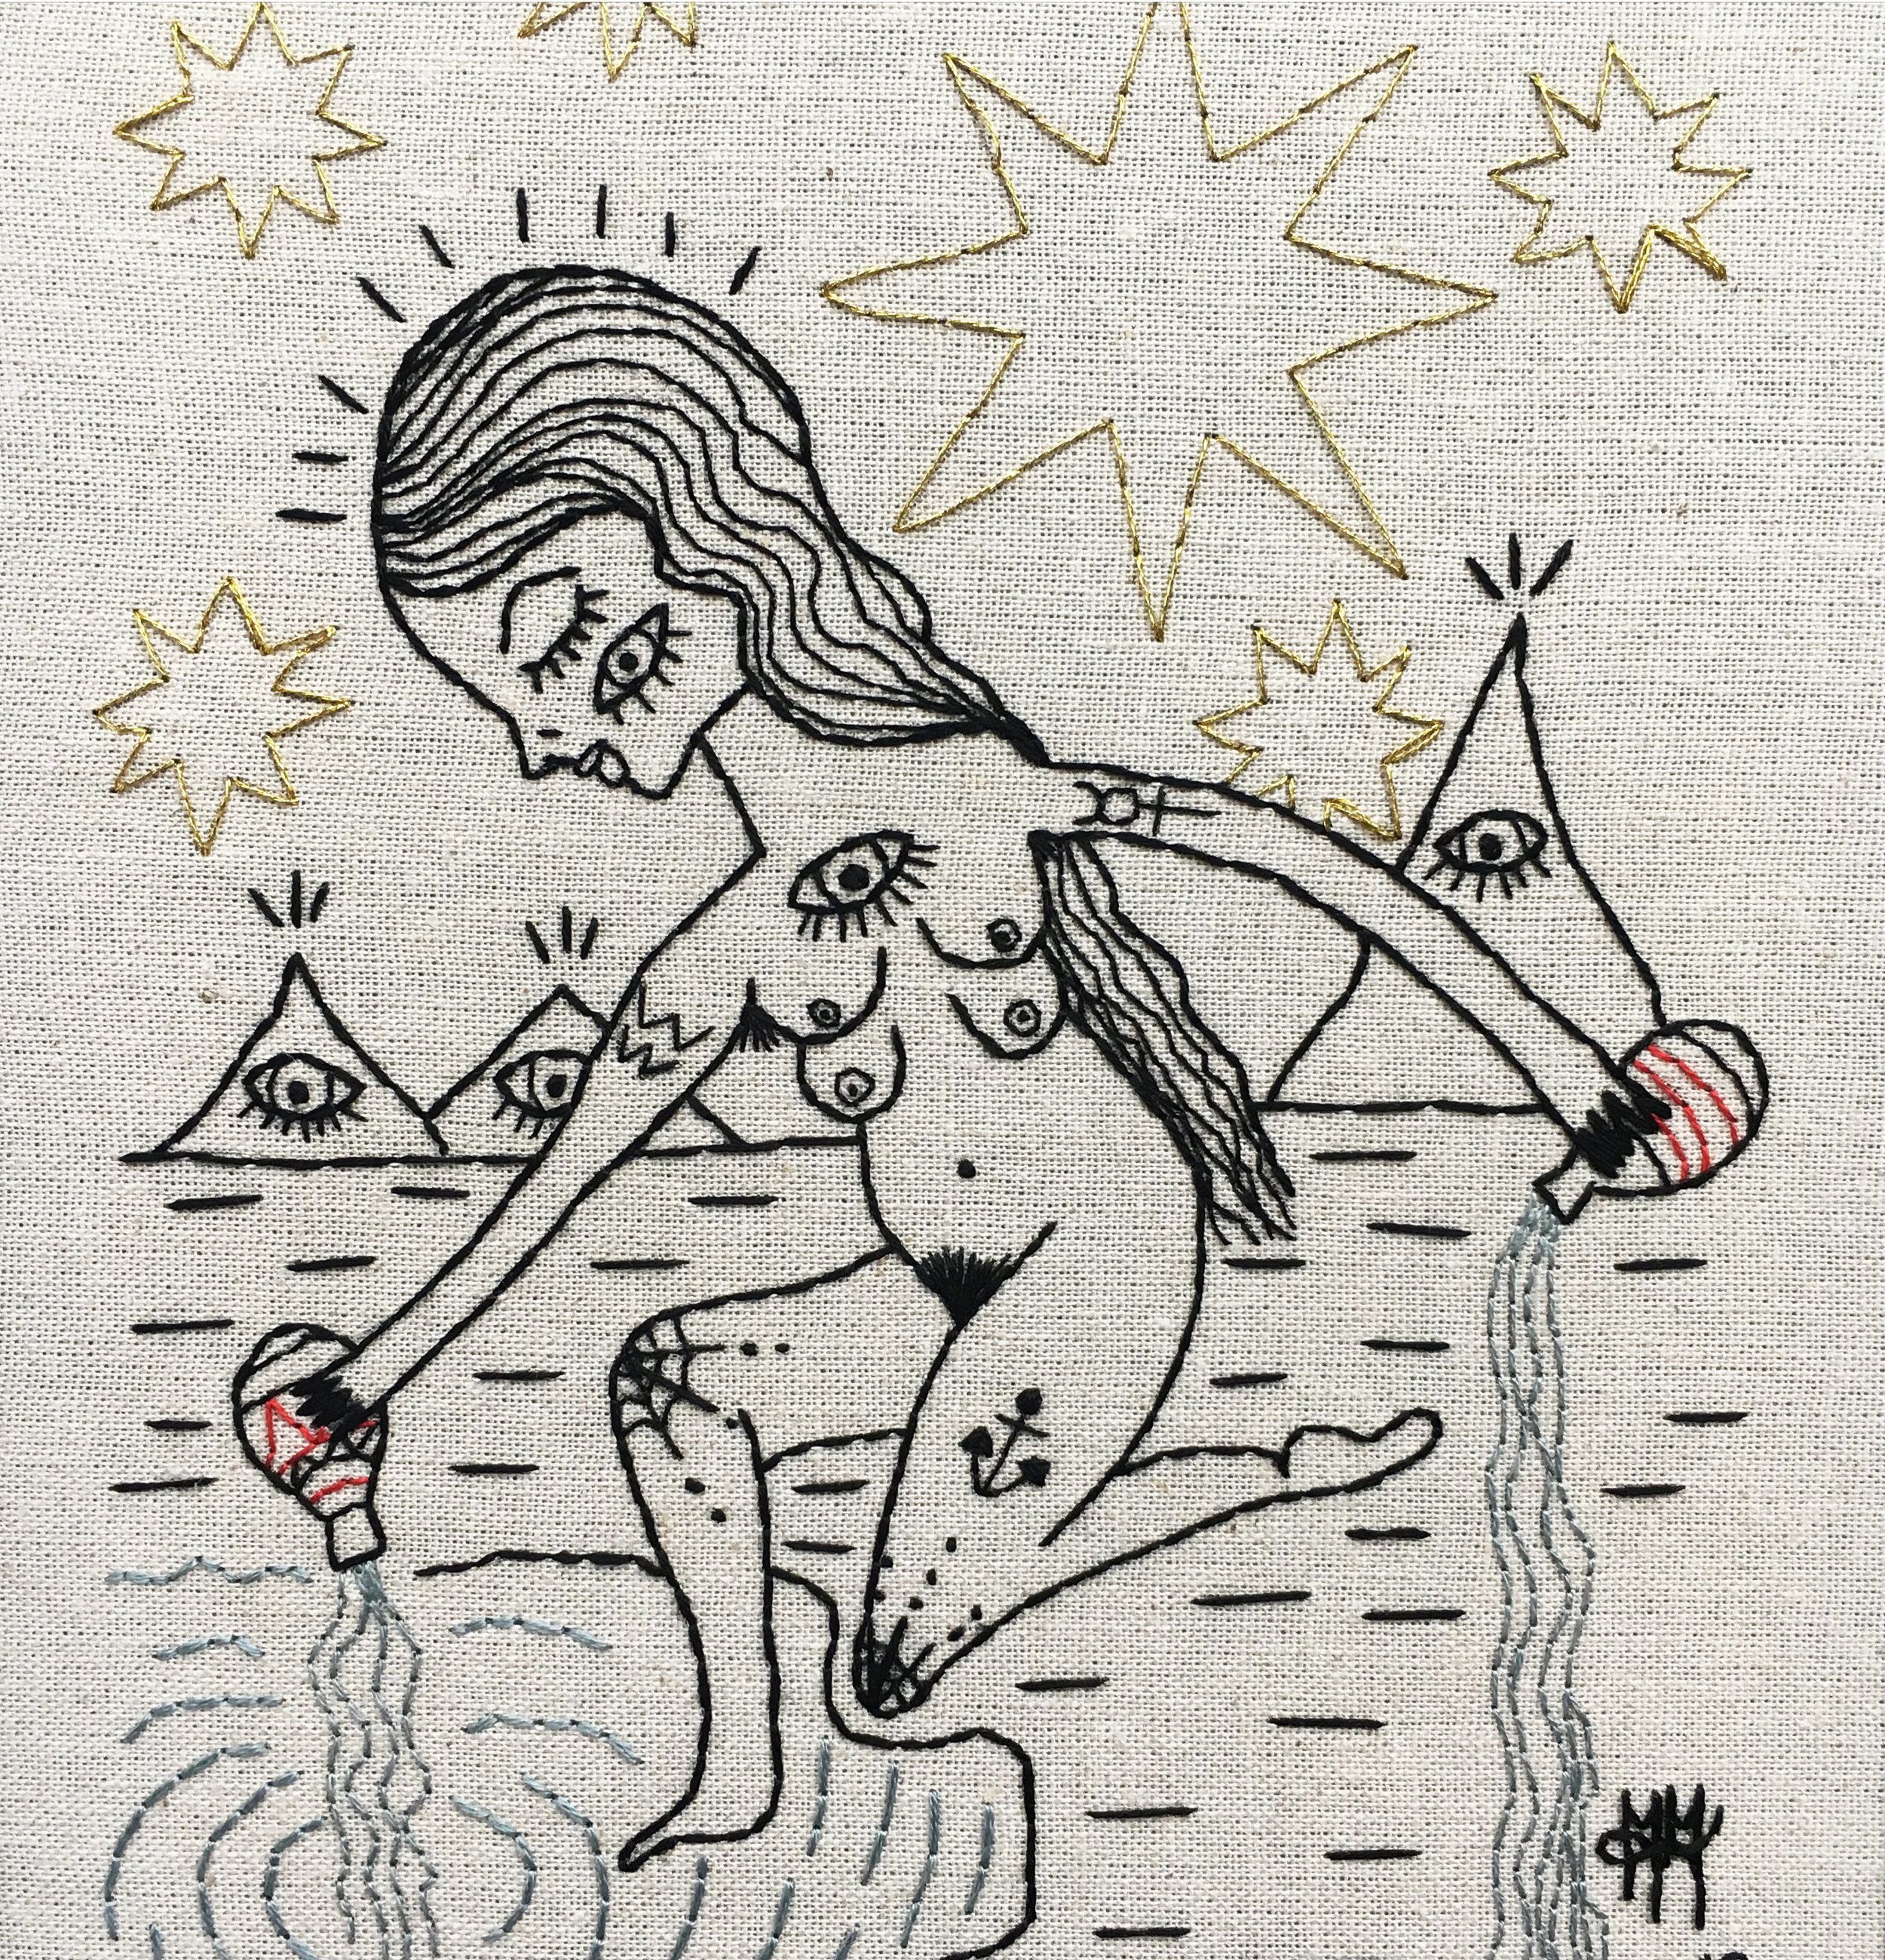 'Of The Tarot' Embroidery Exhibition 2019